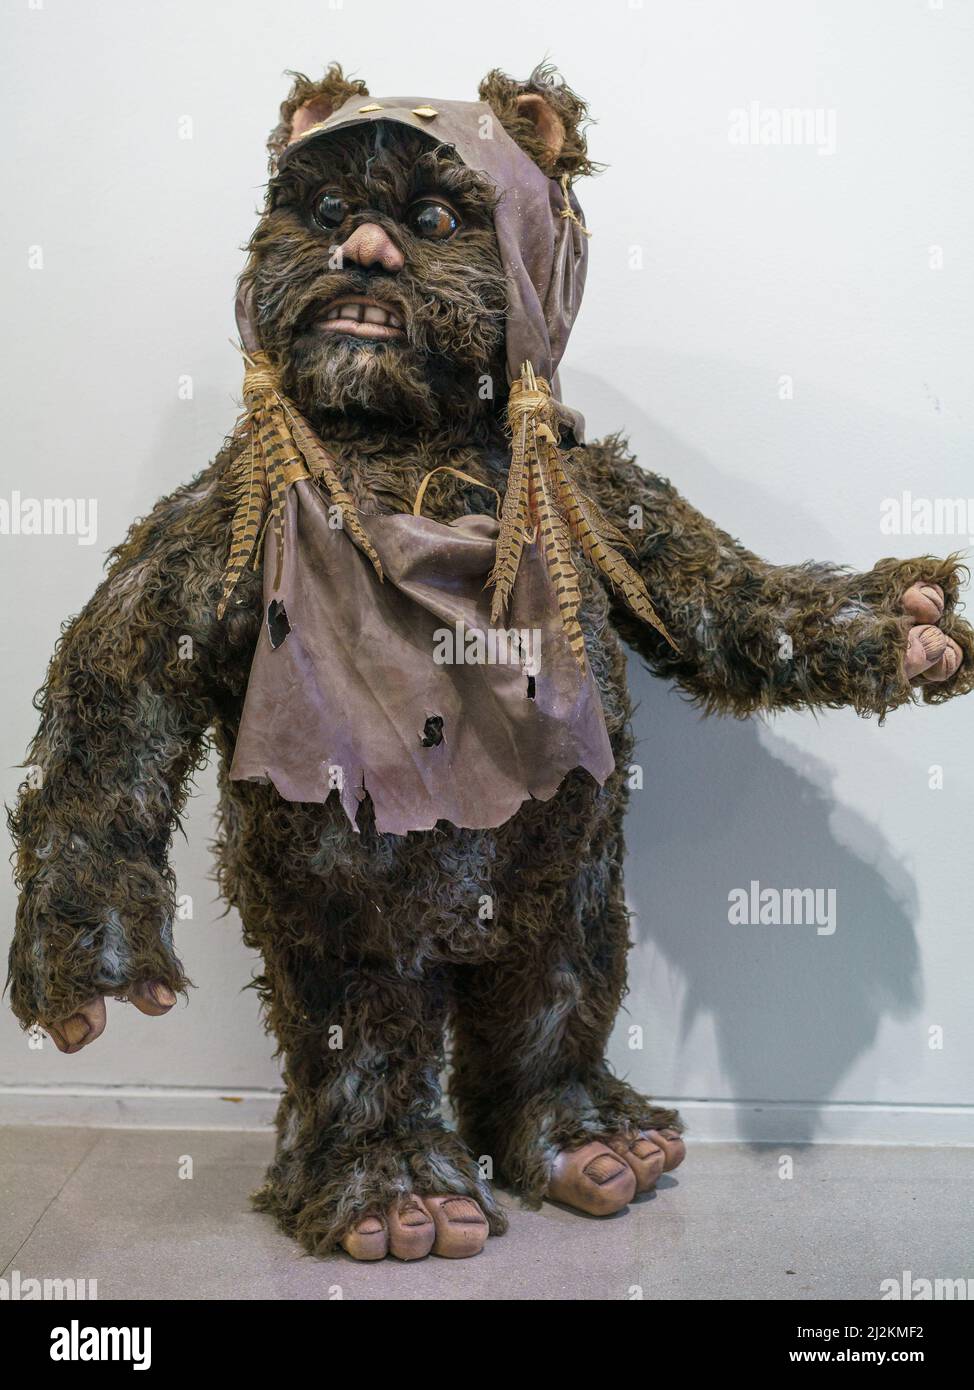 Madrid, Spain. 2nd Apr, 2022. A figure of the character Ewok is exhibited during the exhibition of ''the Star Wars universe'' by the sculptor Juan Villa at the Paco de LucÃ-a exhibition hall in Madrid. The Star Wars universe can be visited for free until April 28 at the Paco de LucÃ-a exhibition hall. The exhibited pieces are part of the work that this master craftsman is developing with his team for the future permanent exhibition Puerto Espacio, a science fiction project of his own. Credit: ZUMA Press, Inc./Alamy Live News Stock Photo